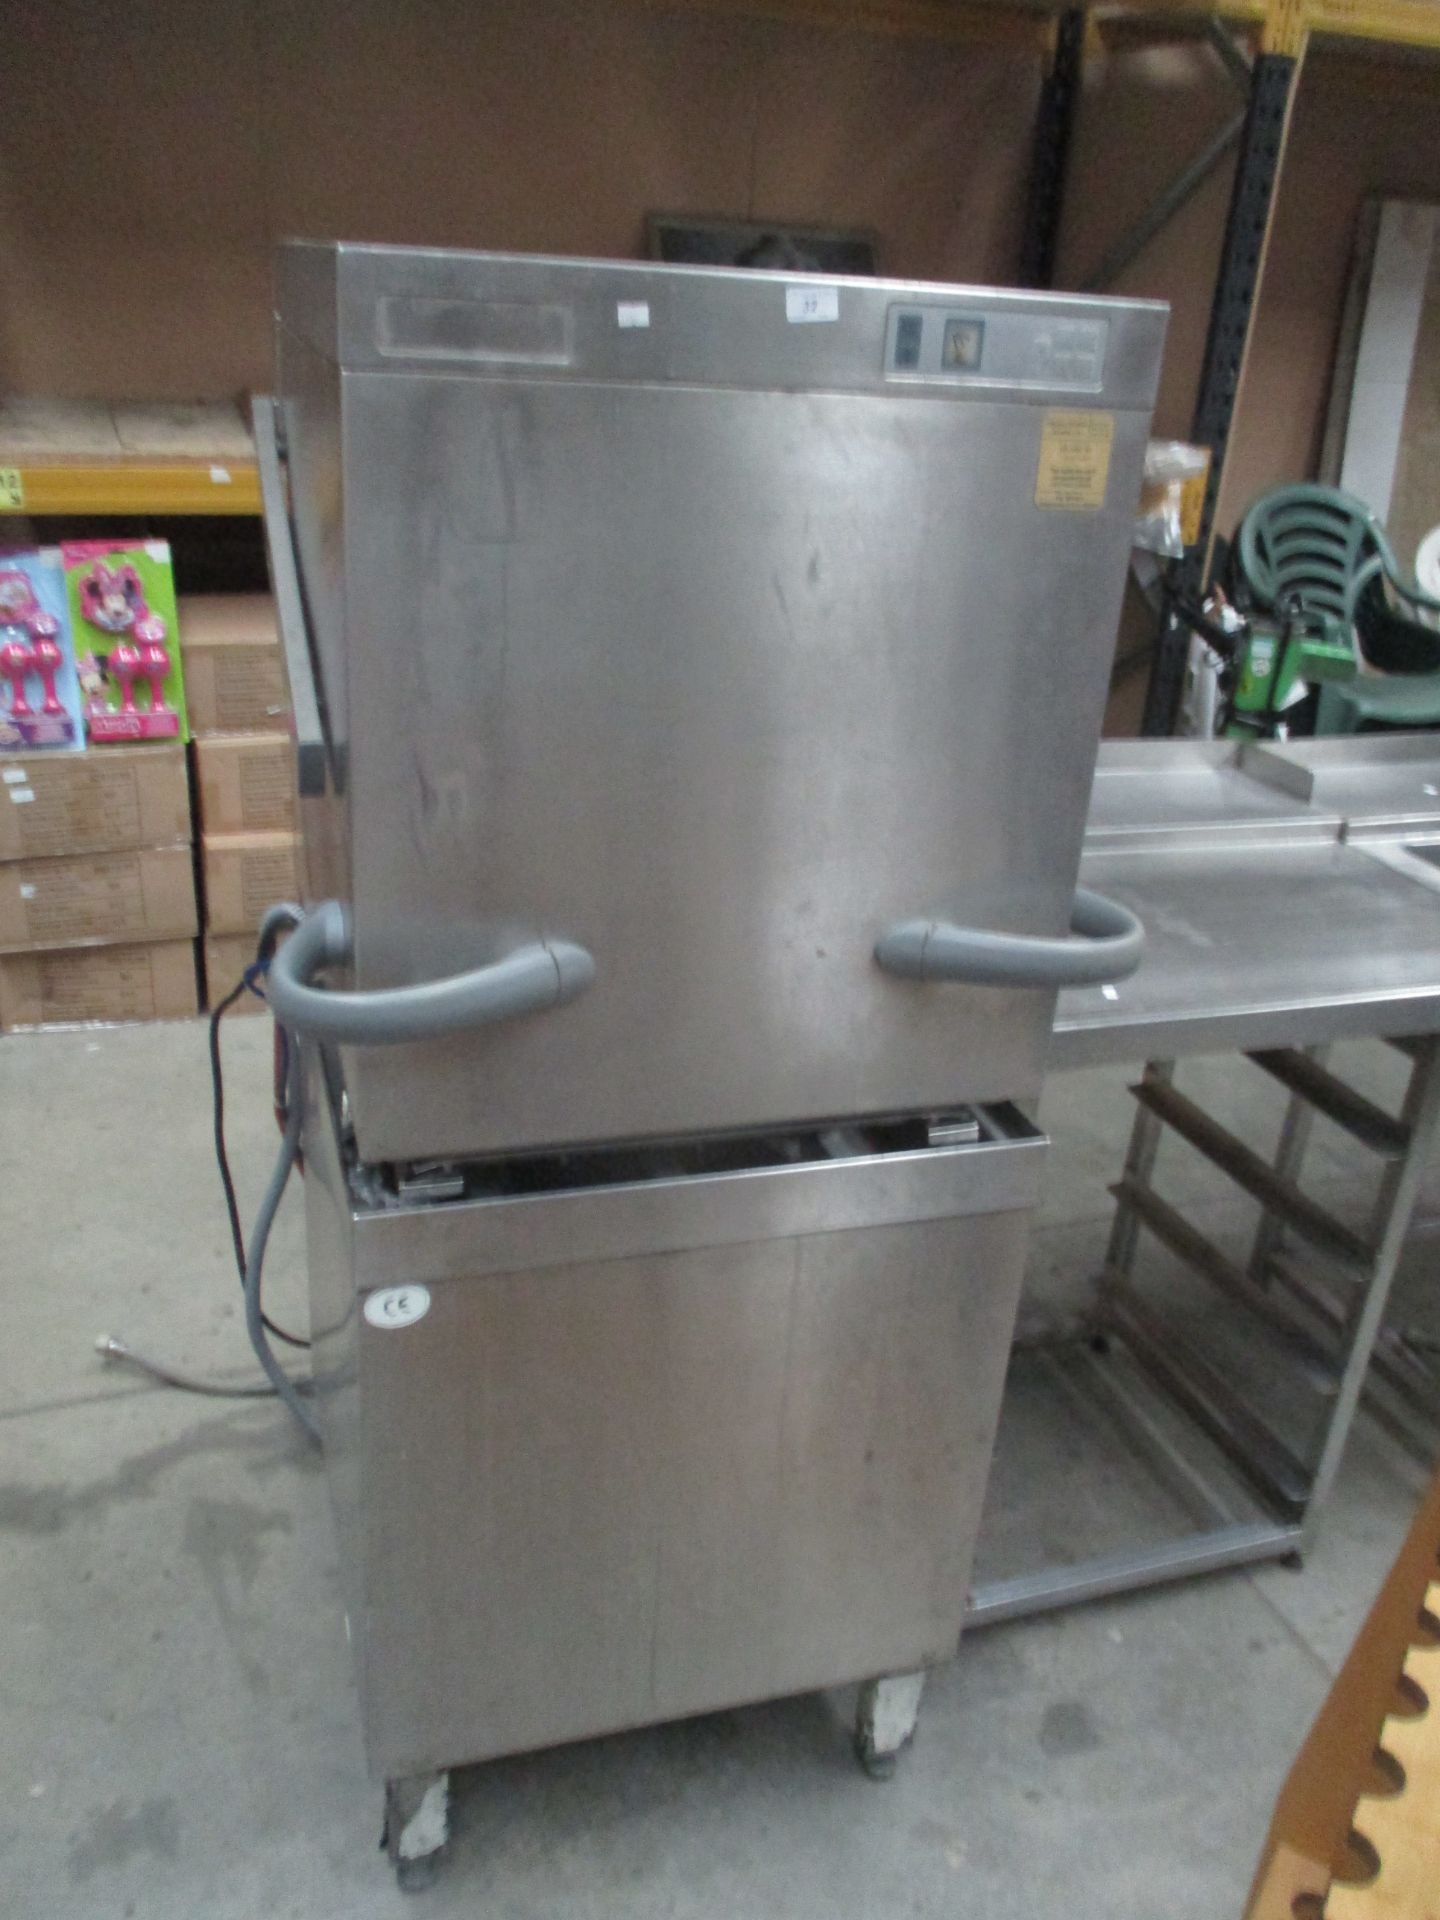 A Winterhalter stainless steel commercial glass washer - 3 phase